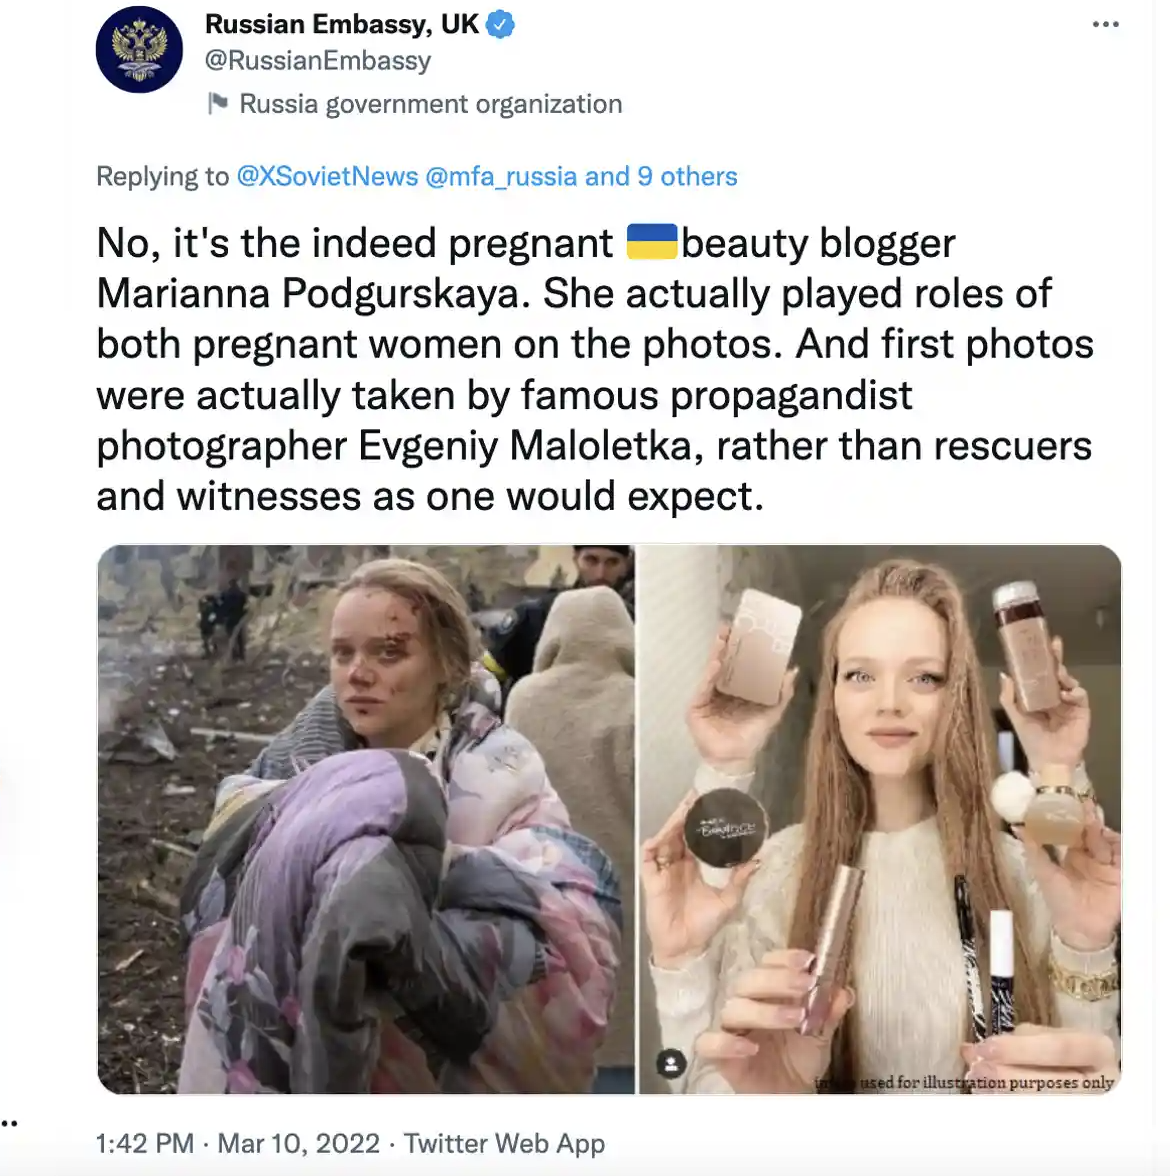 Another tweet from the Russian Embassy in London spreading disinformation, which was later deleted by Twitter